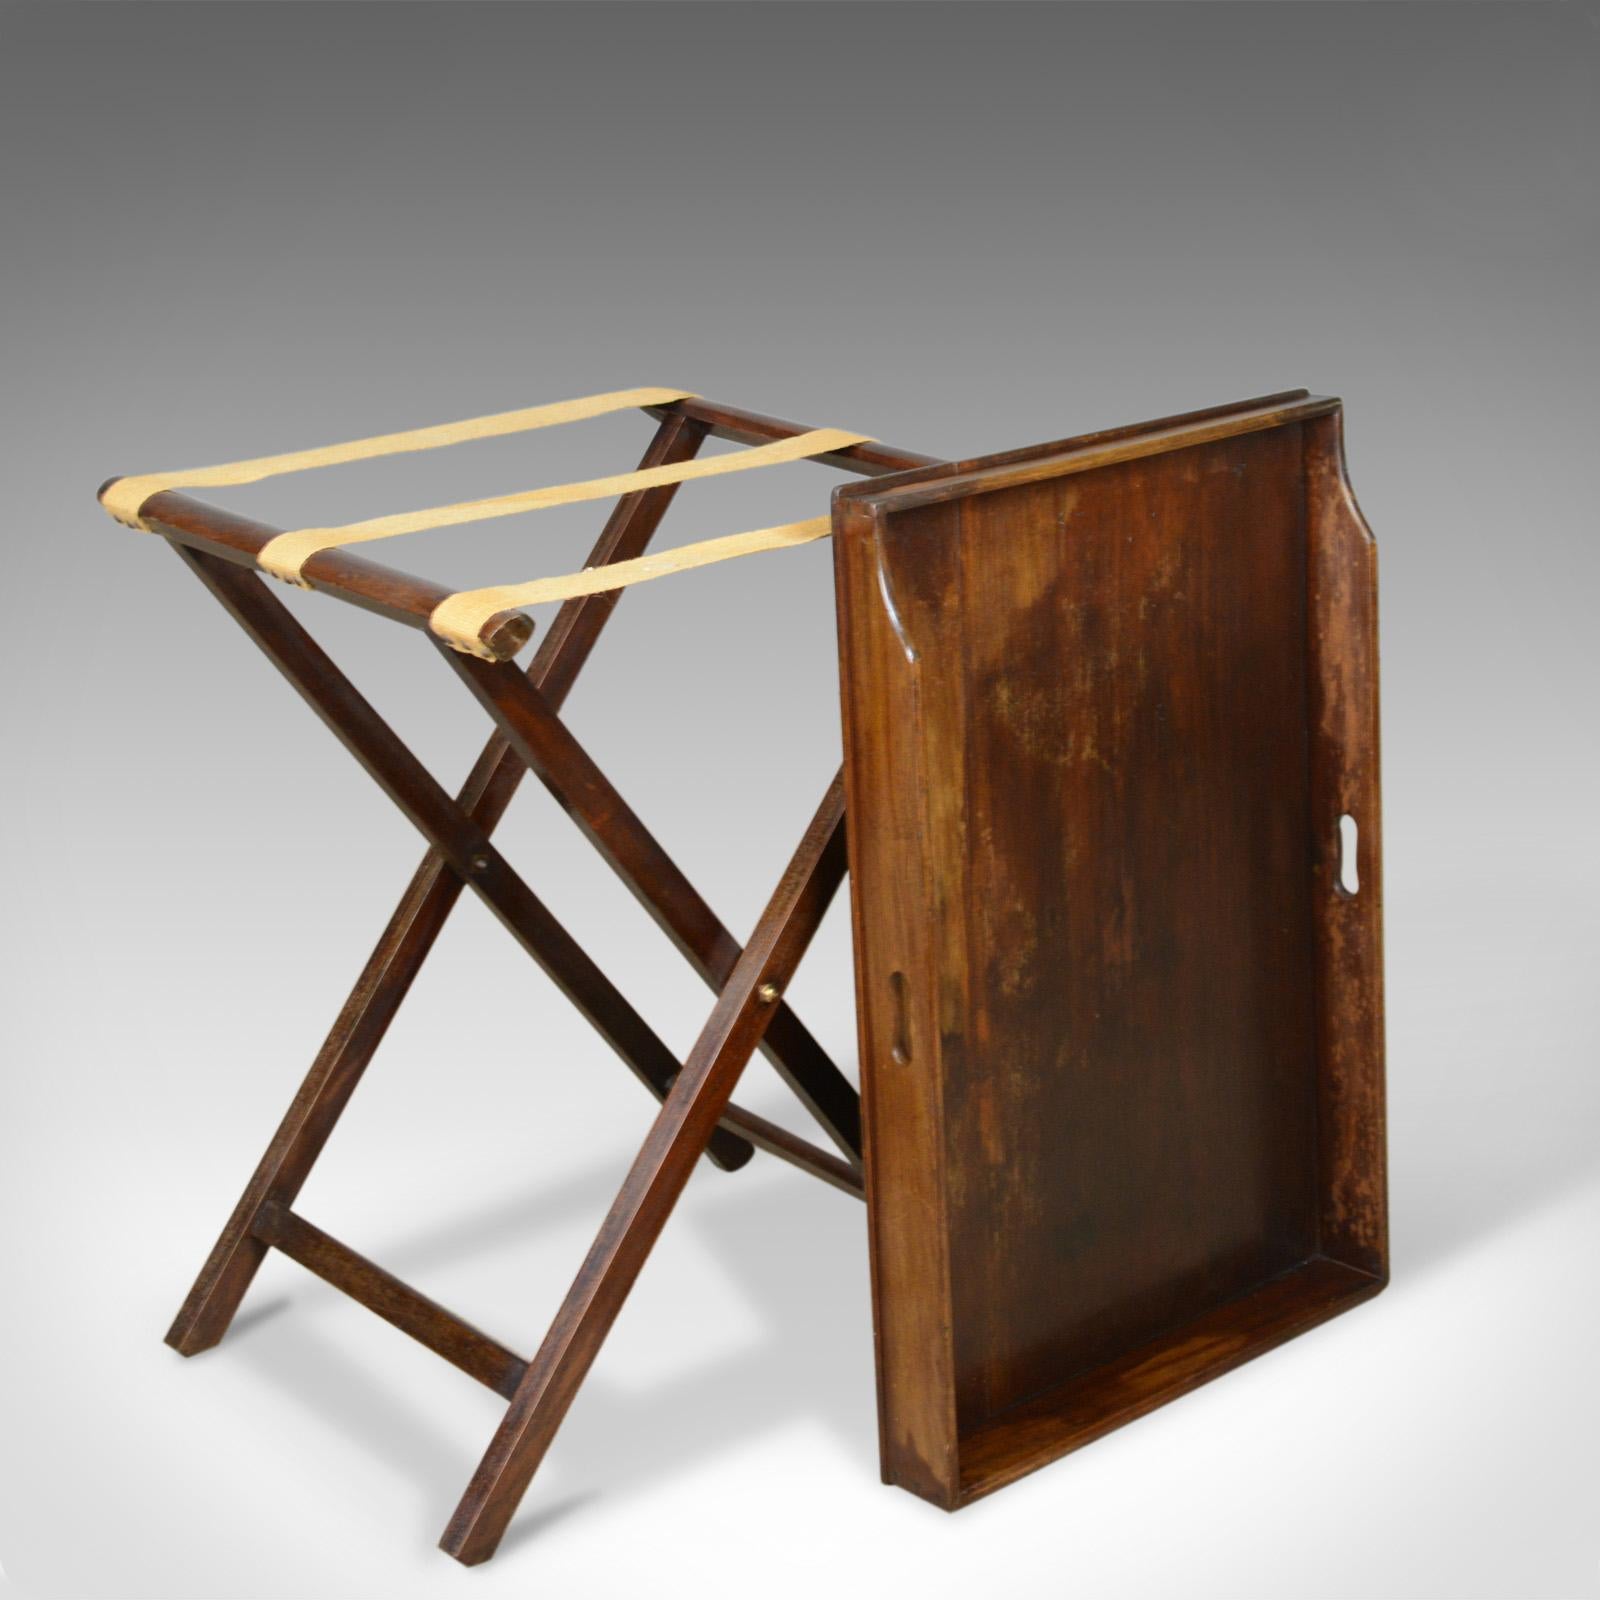 Late Victorian Antique Butler's Tray Table, English, Mahogany, Folding Stand, circa 1900